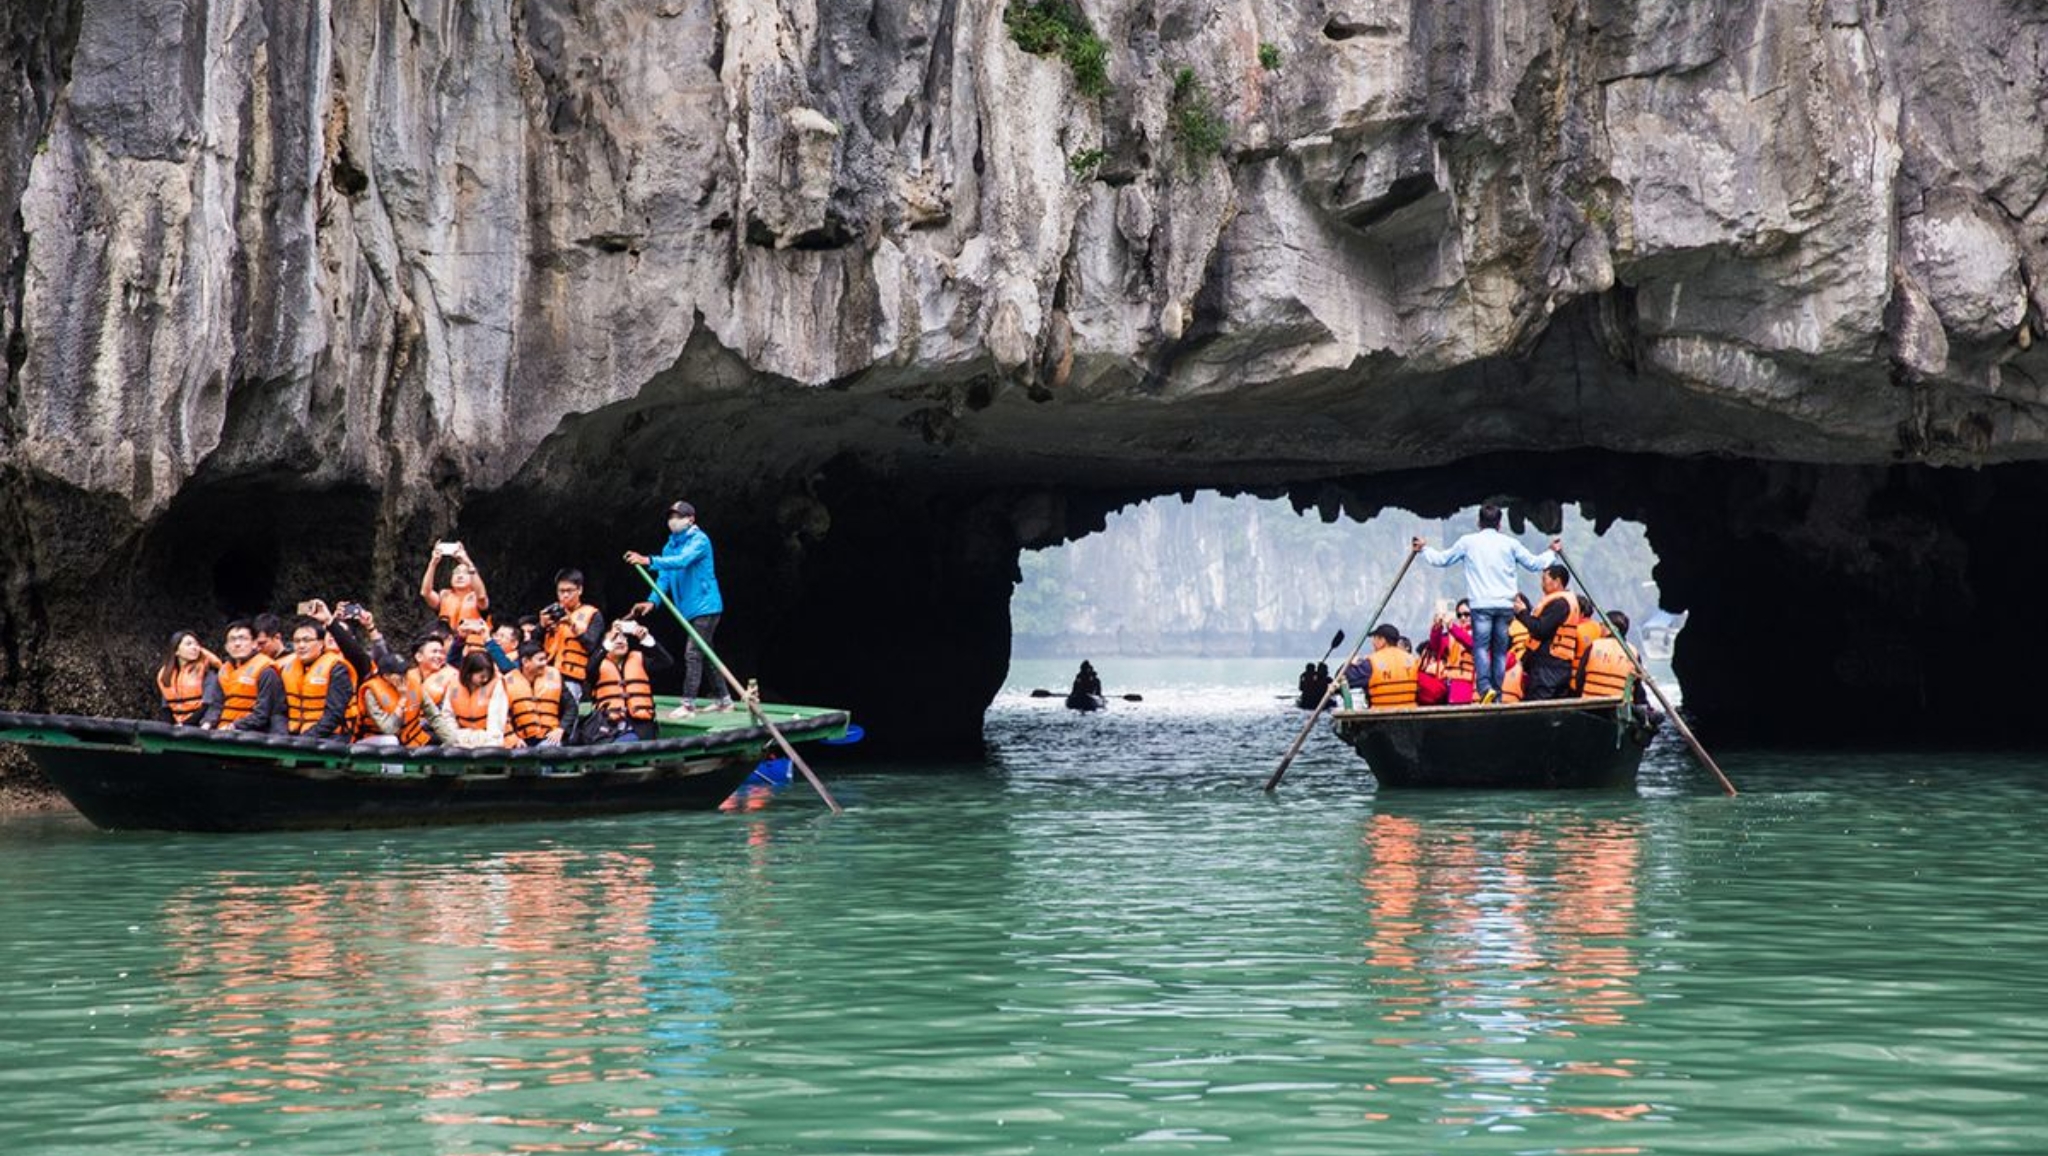 Luon Cave Is An Ideal Kayaking Spot